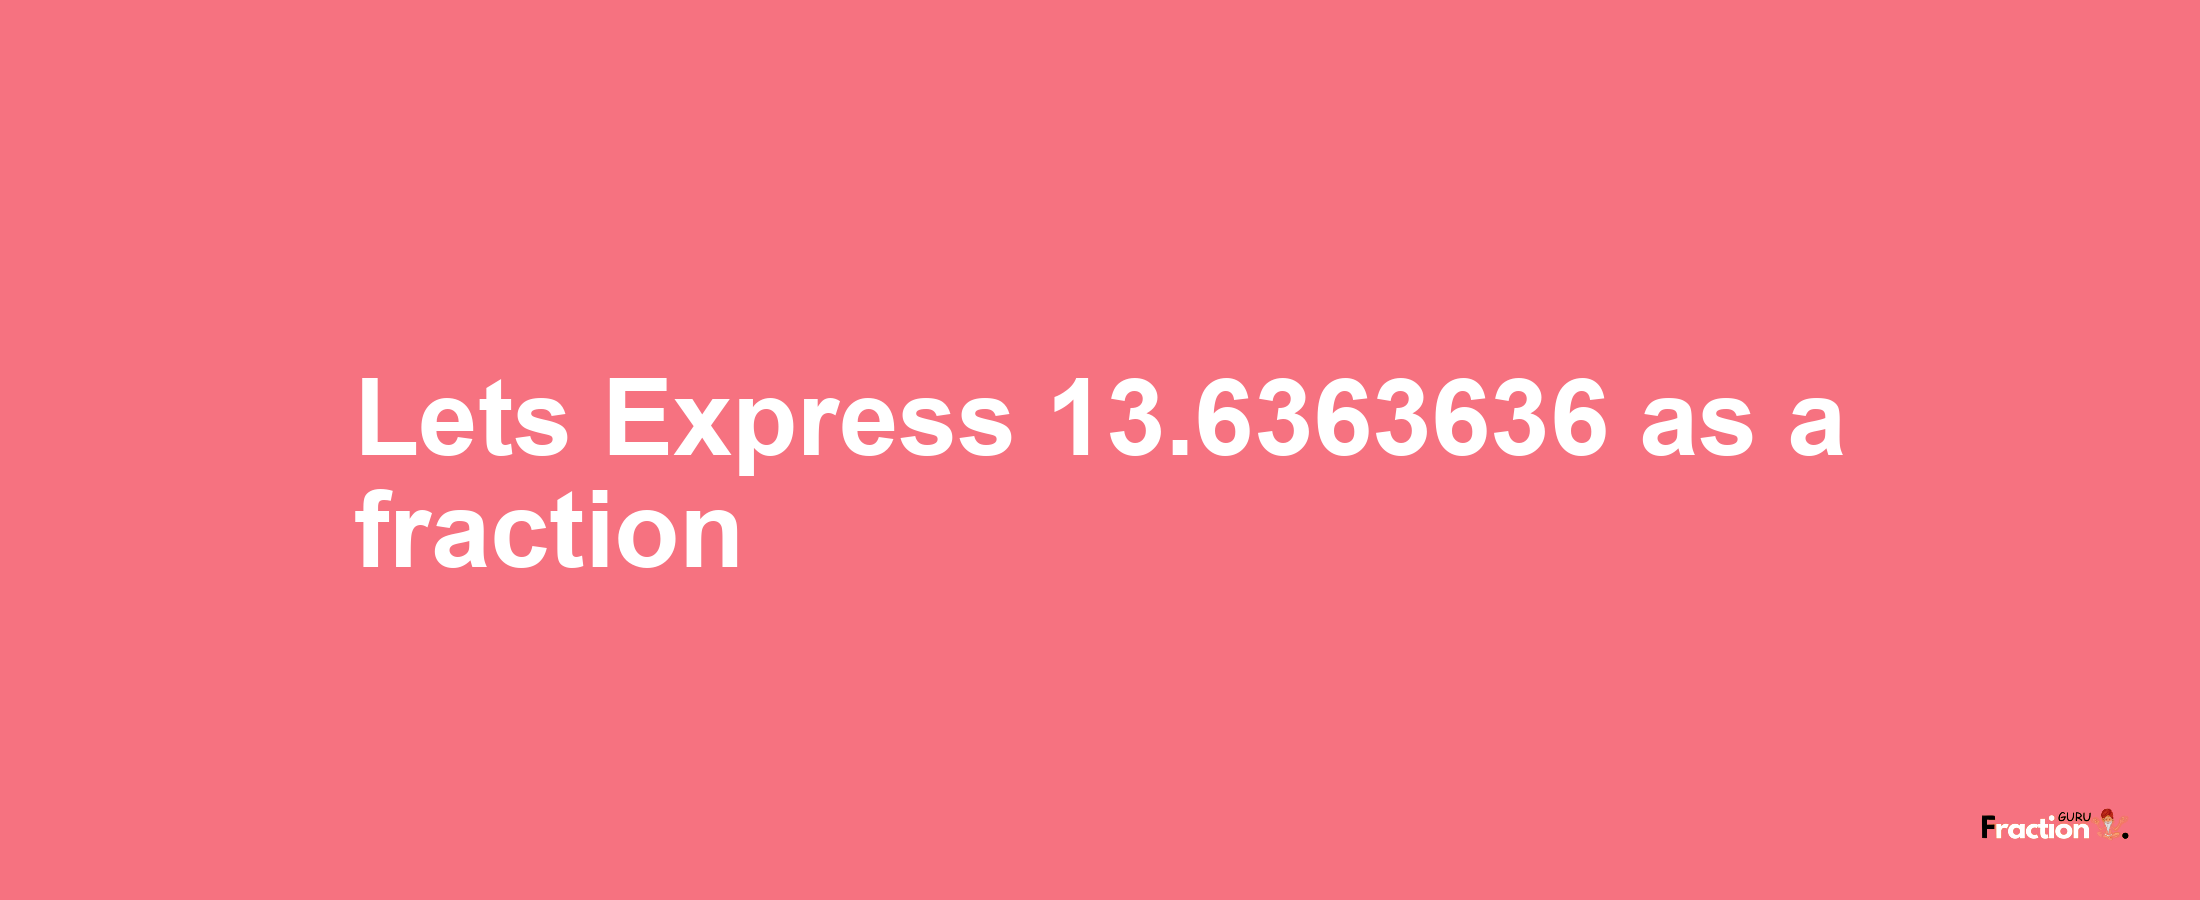 Lets Express 13.6363636 as afraction